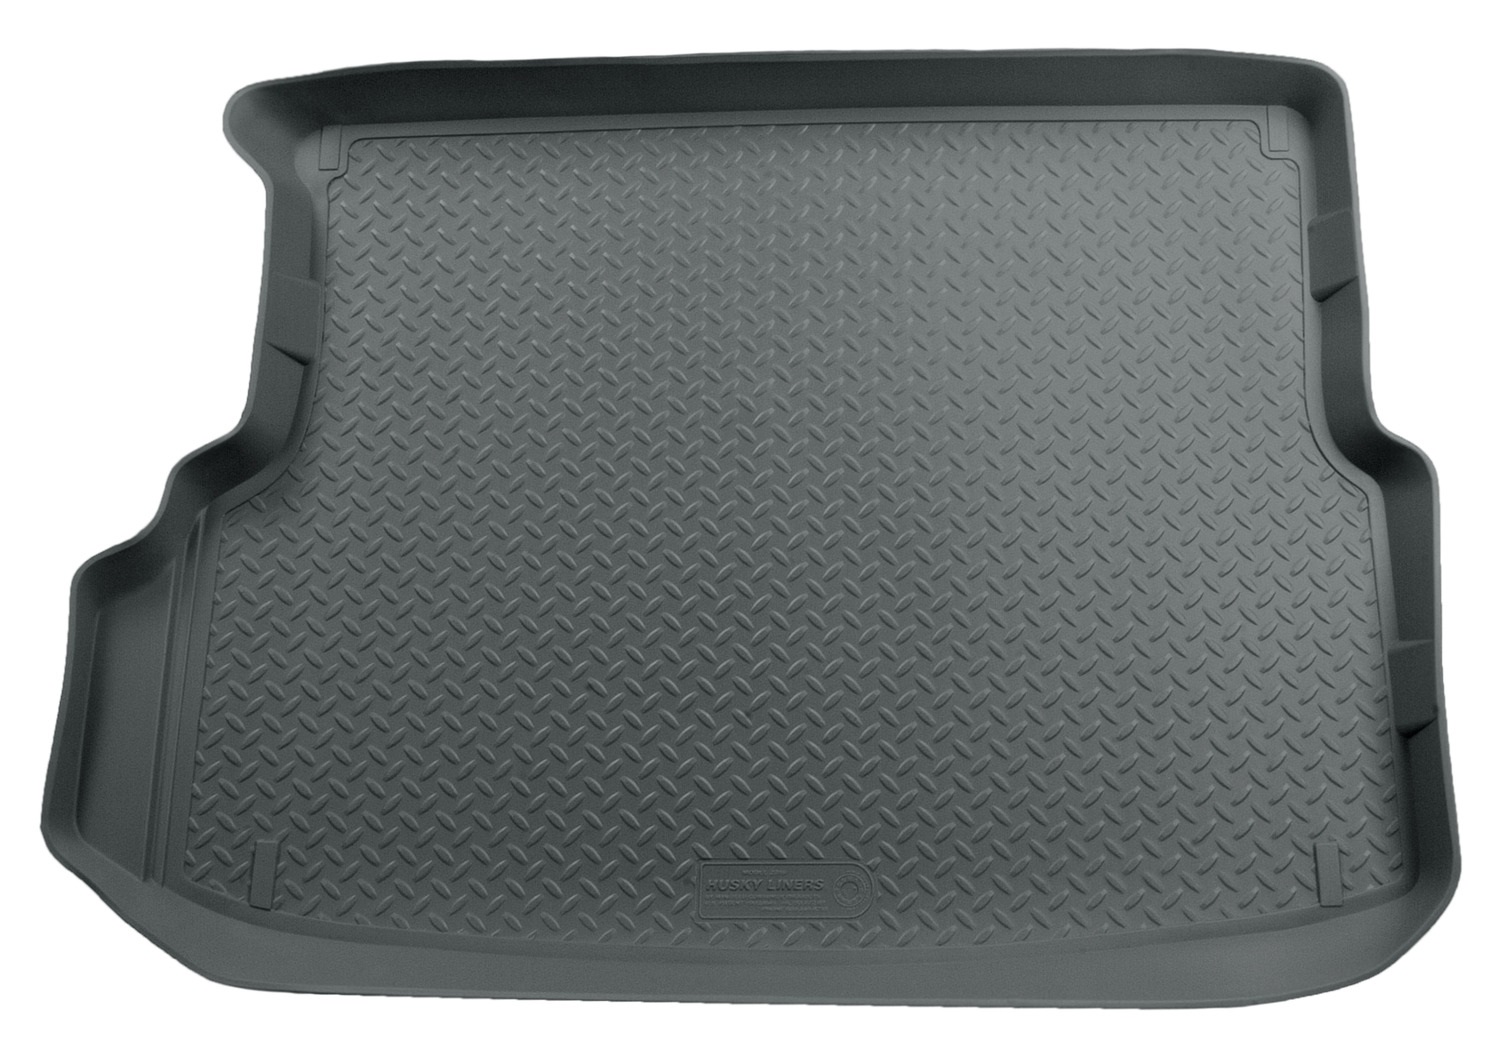 Husky Liners Husky Liners 23162 Classic Style; Cargo Liner Fits 08-12 Escape Mariner Tribute